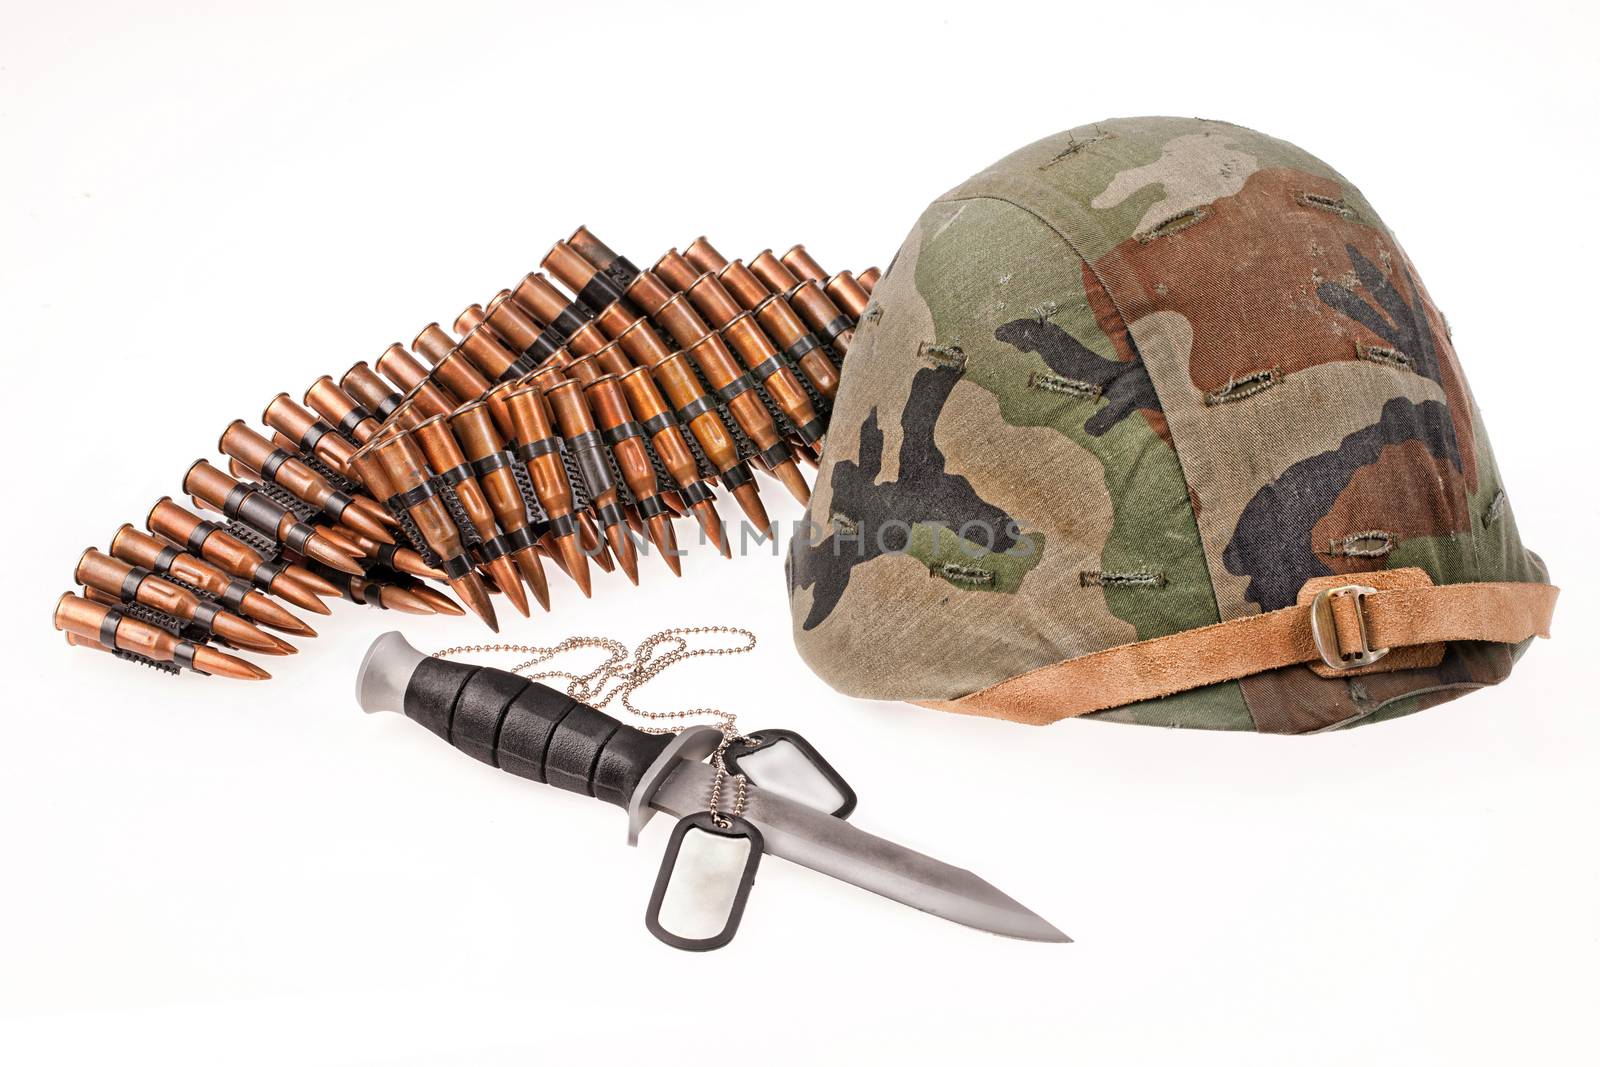 Army helmet, cartridges, knife and badge on isolated background